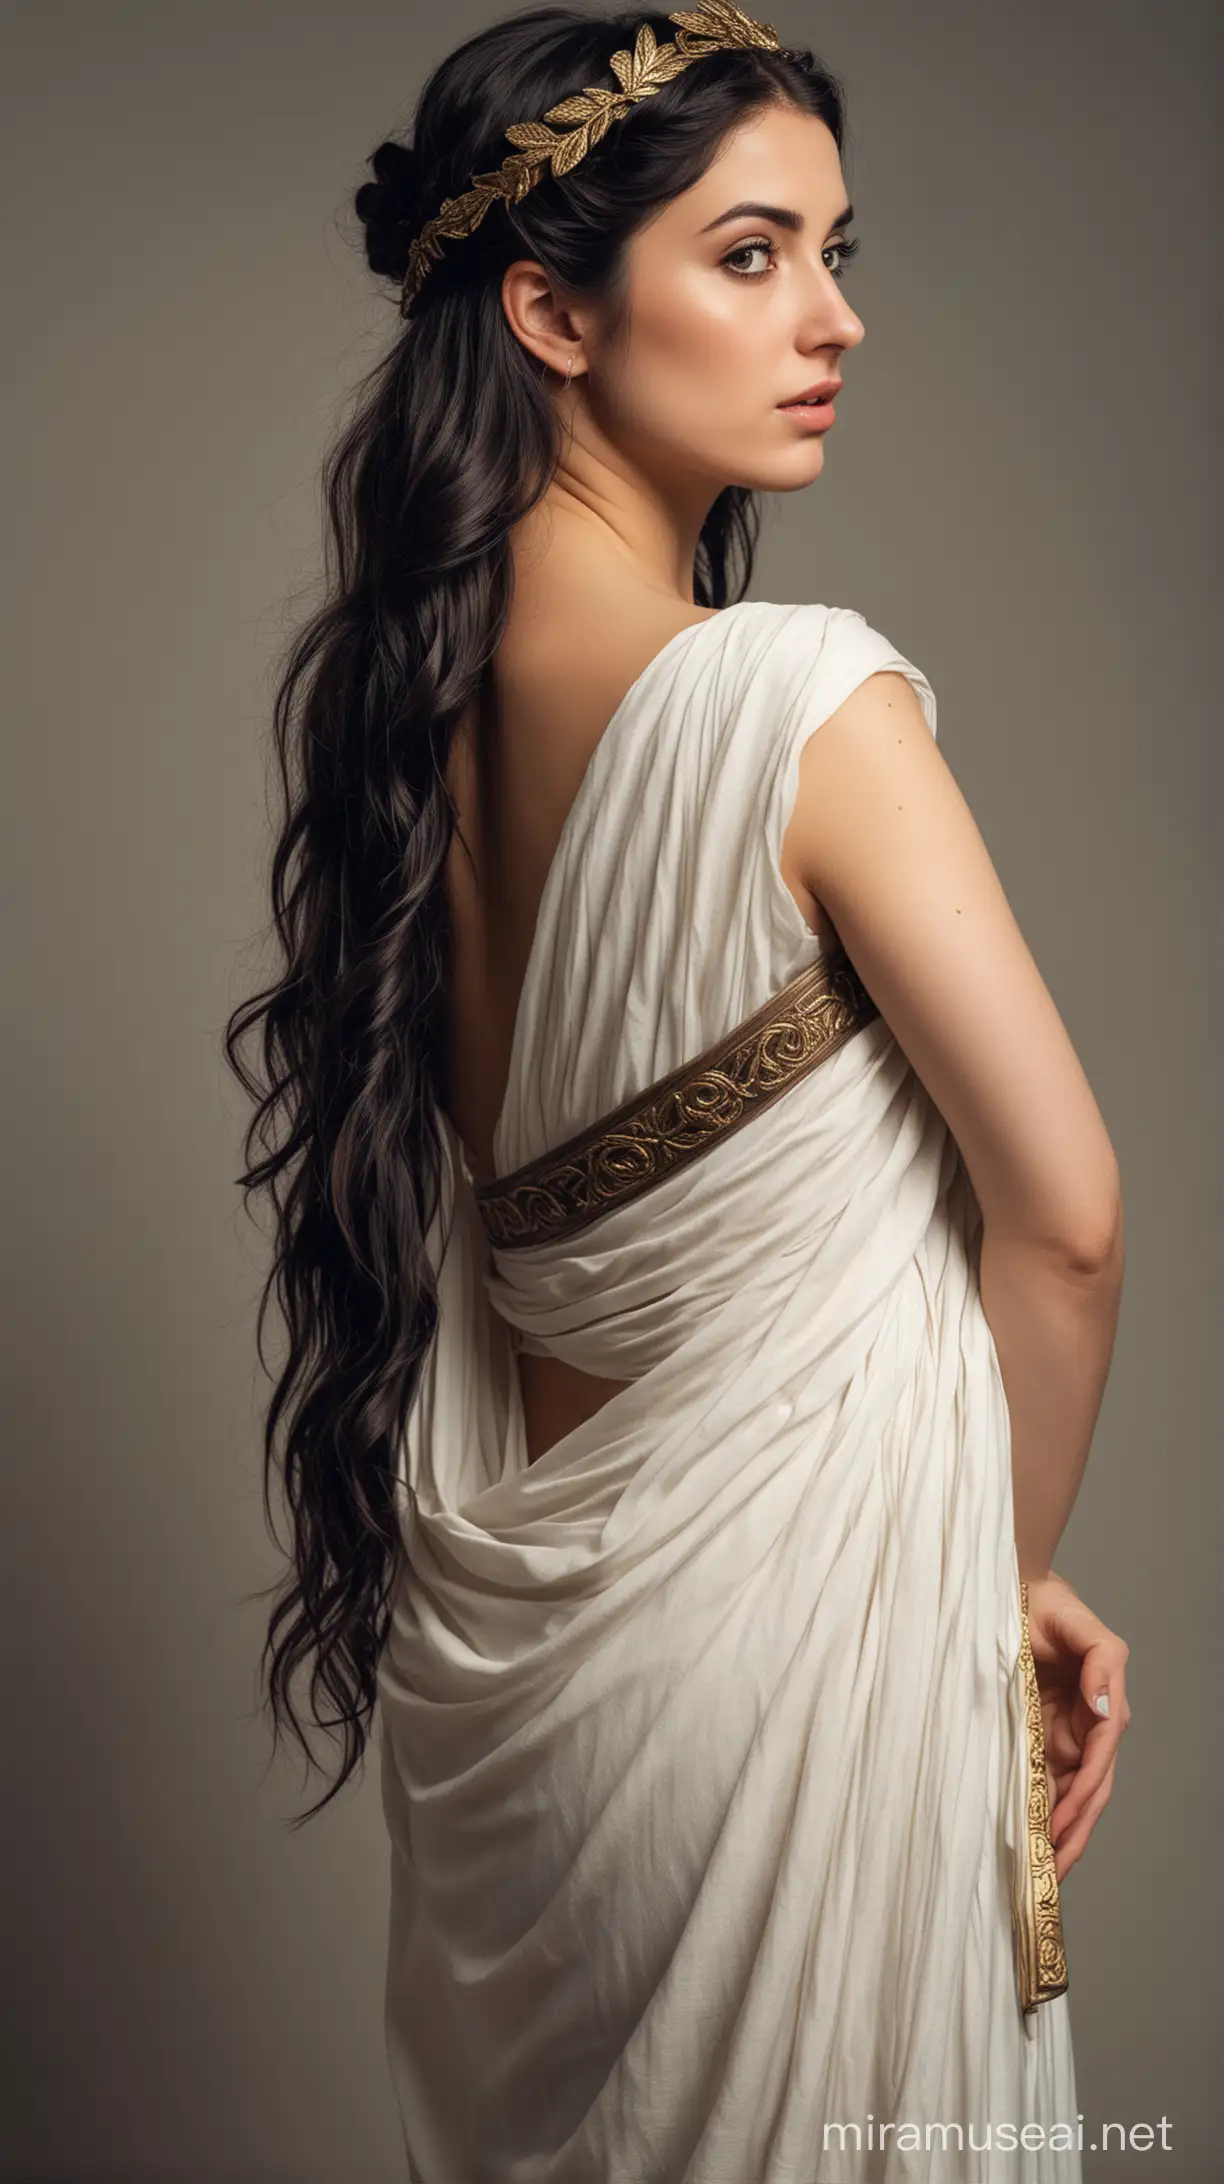 Woman with Dark Hair in Ancient Greek Attire with a Scornful Expression